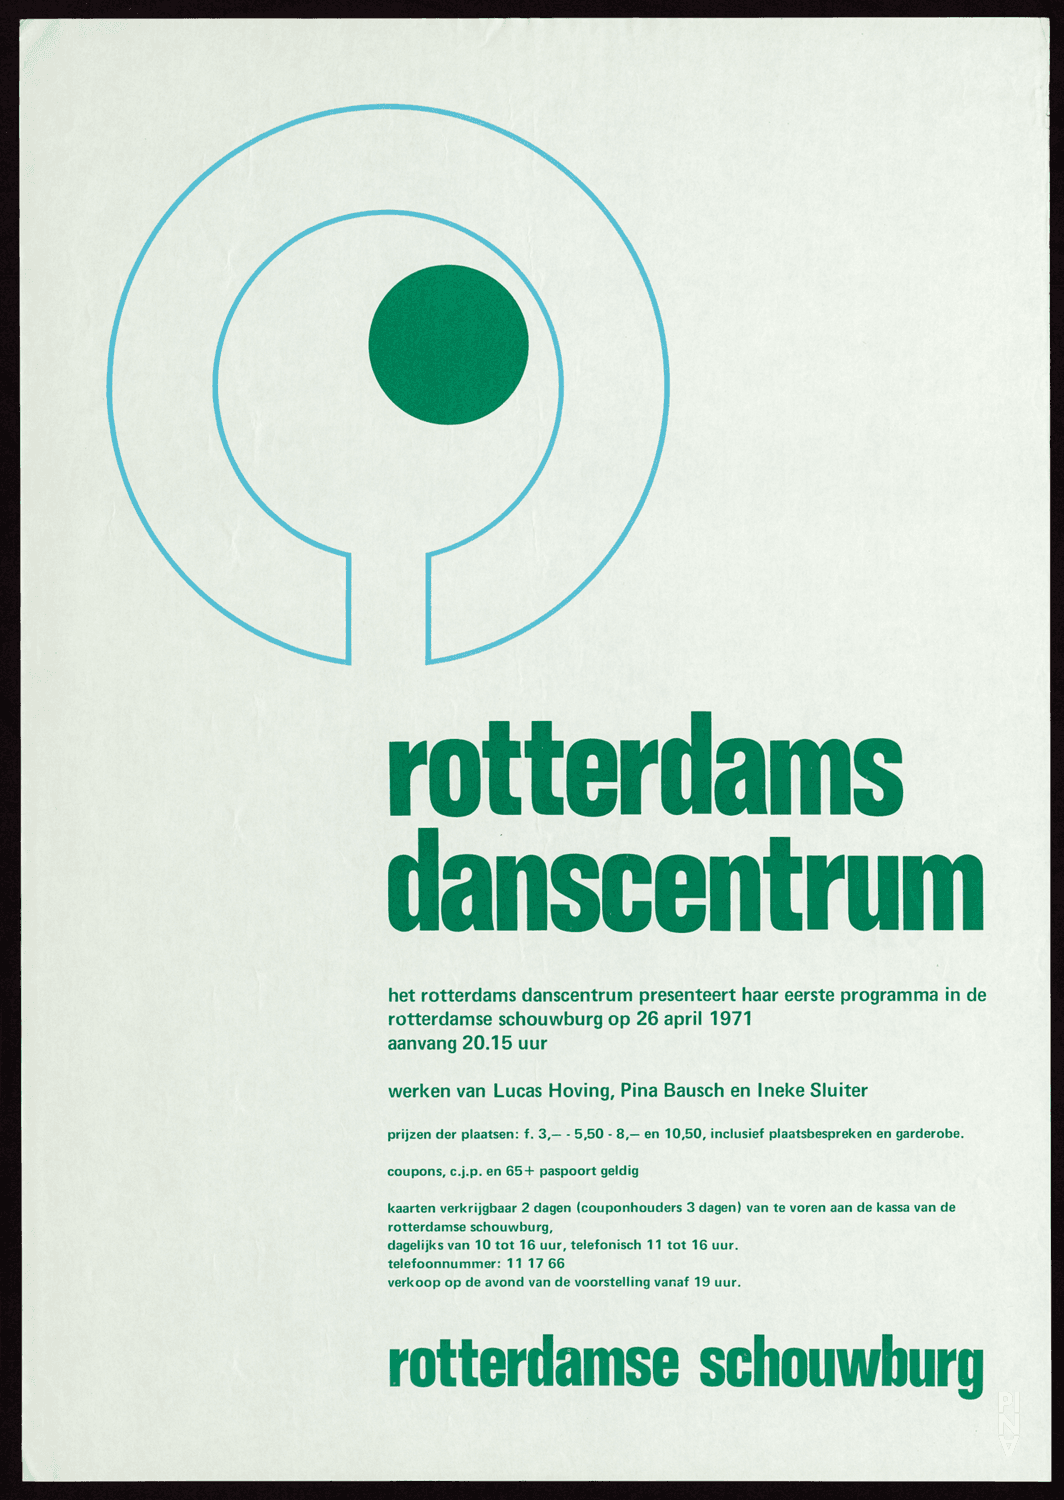 Poster for “Im Wind der Zeit” by Pina Bausch, “Suite uit de Watermuziek” by Ineke Sluiter and “Collage” by Lucas Hoving in Rotterdam, April 26, 1971